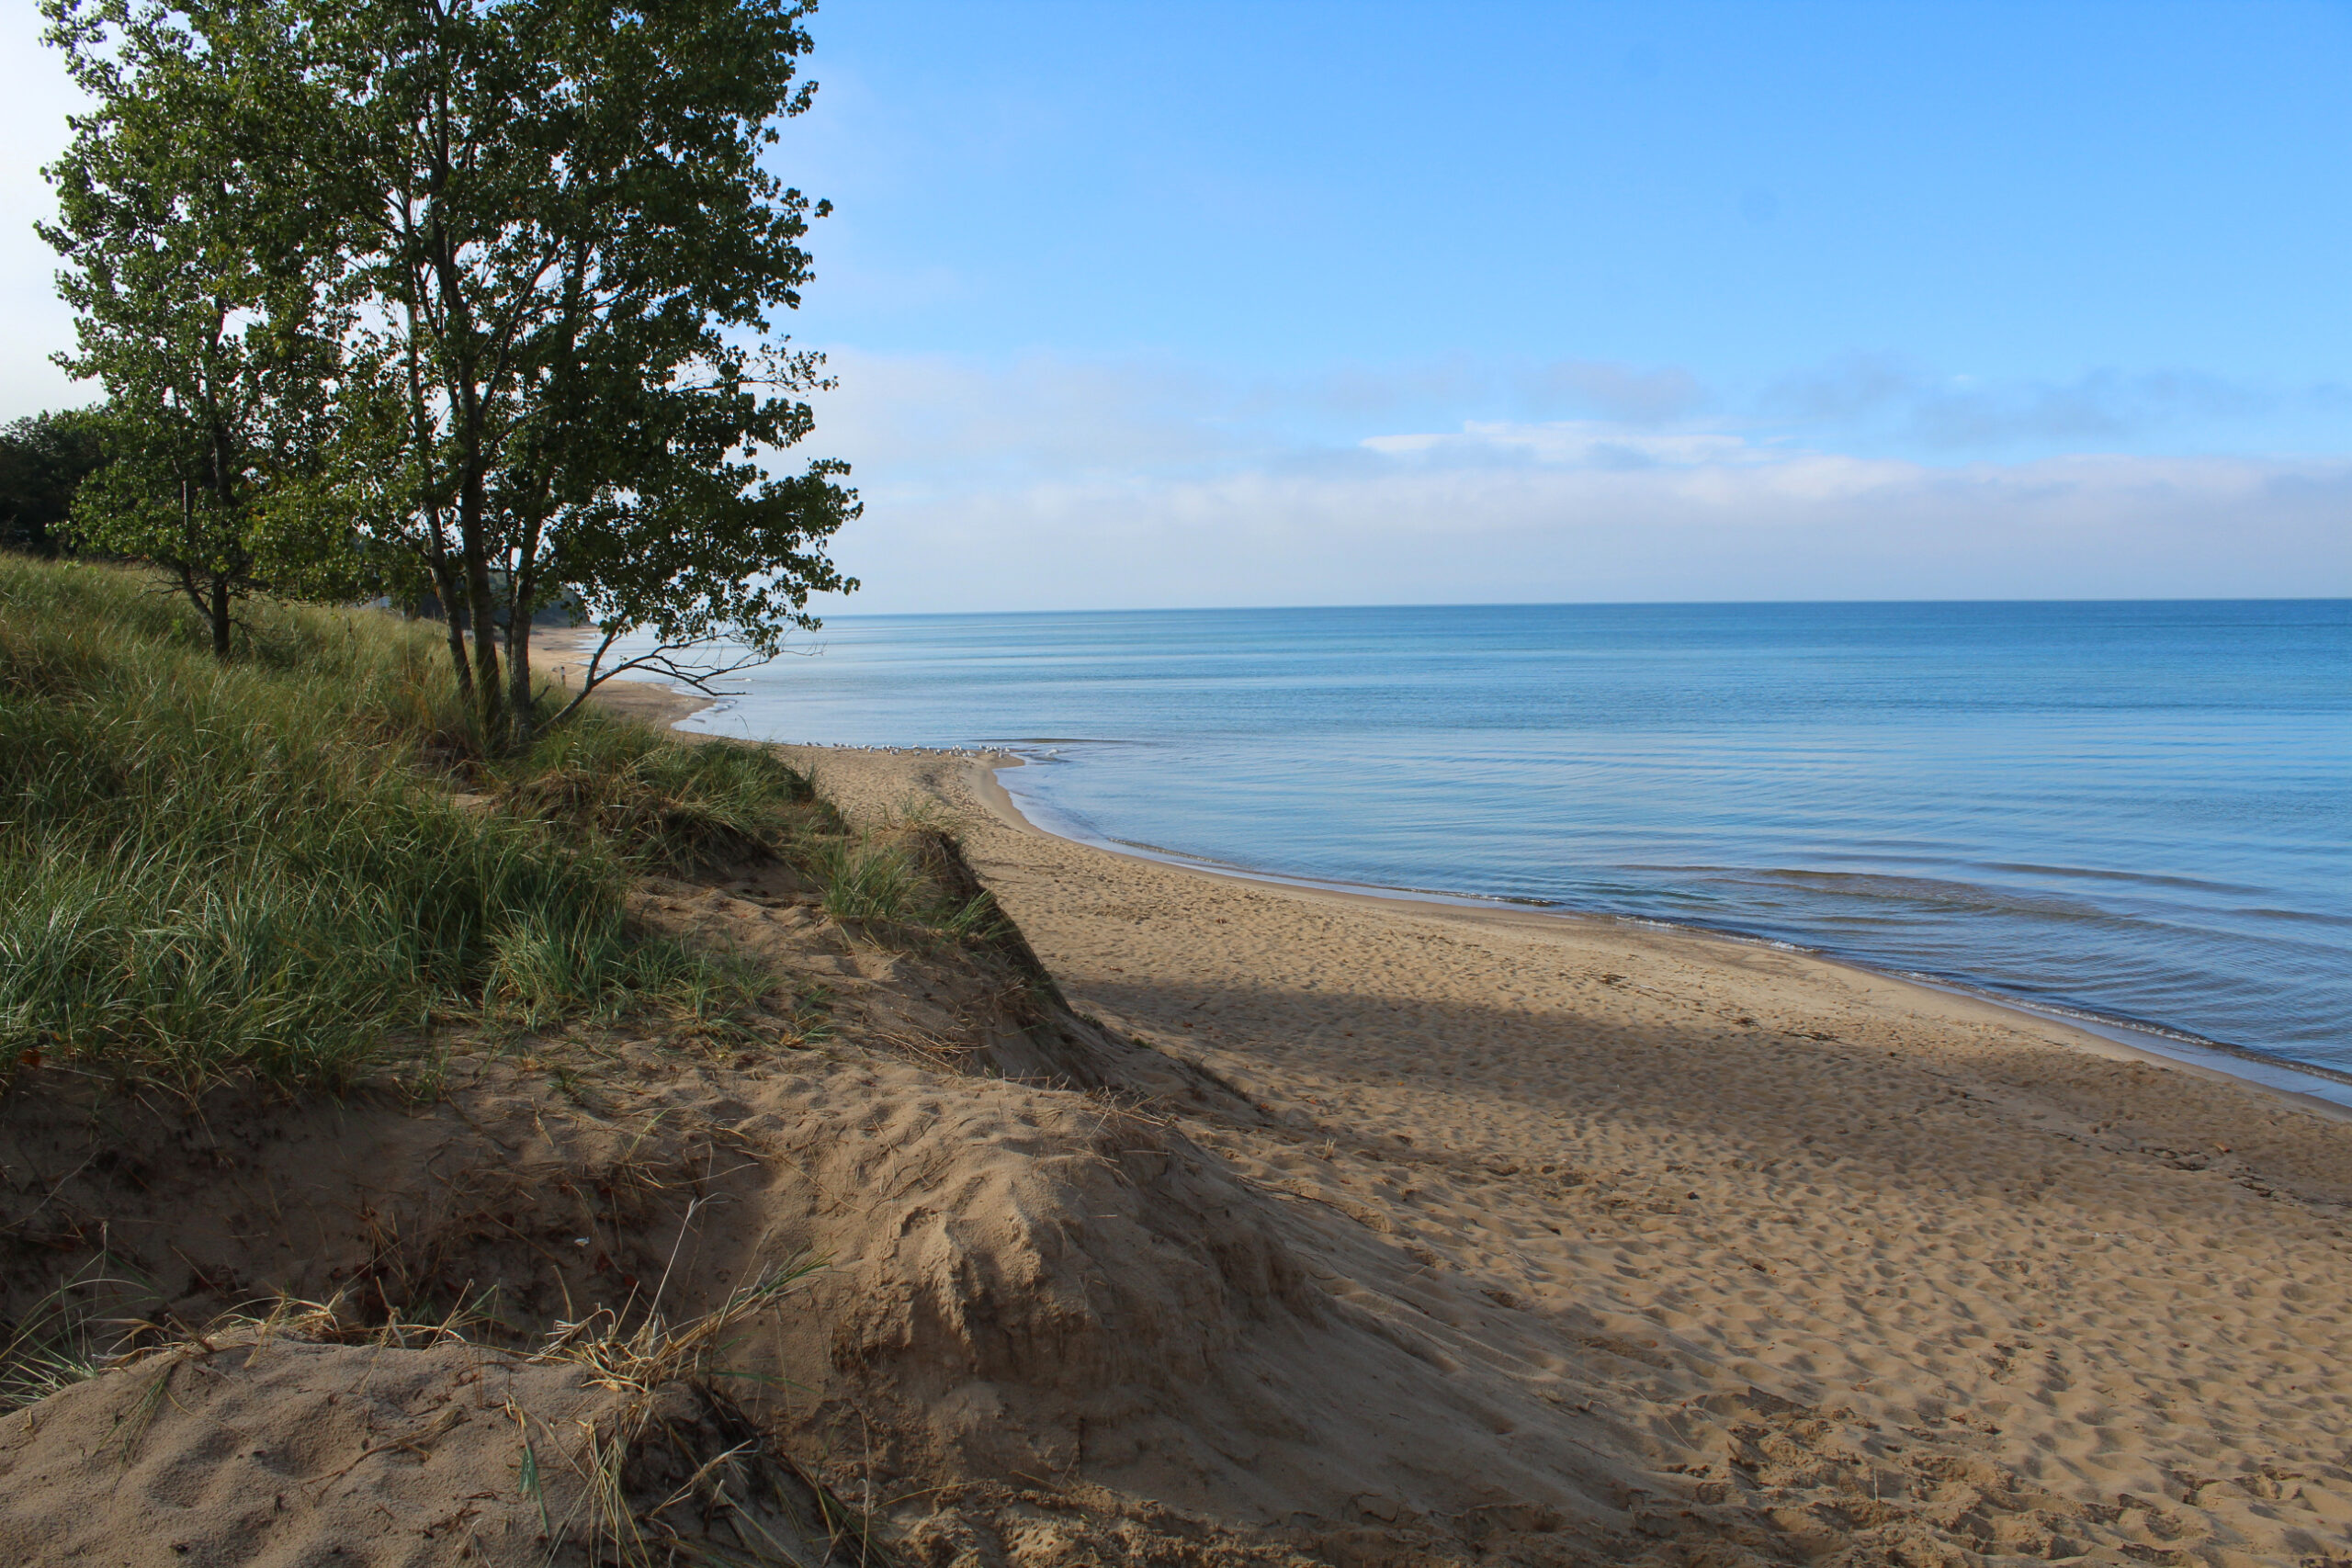 The shoreline dunes of Oval Beach on Lake Michigan were purposefully planted with trees and vegetation to stabilize them